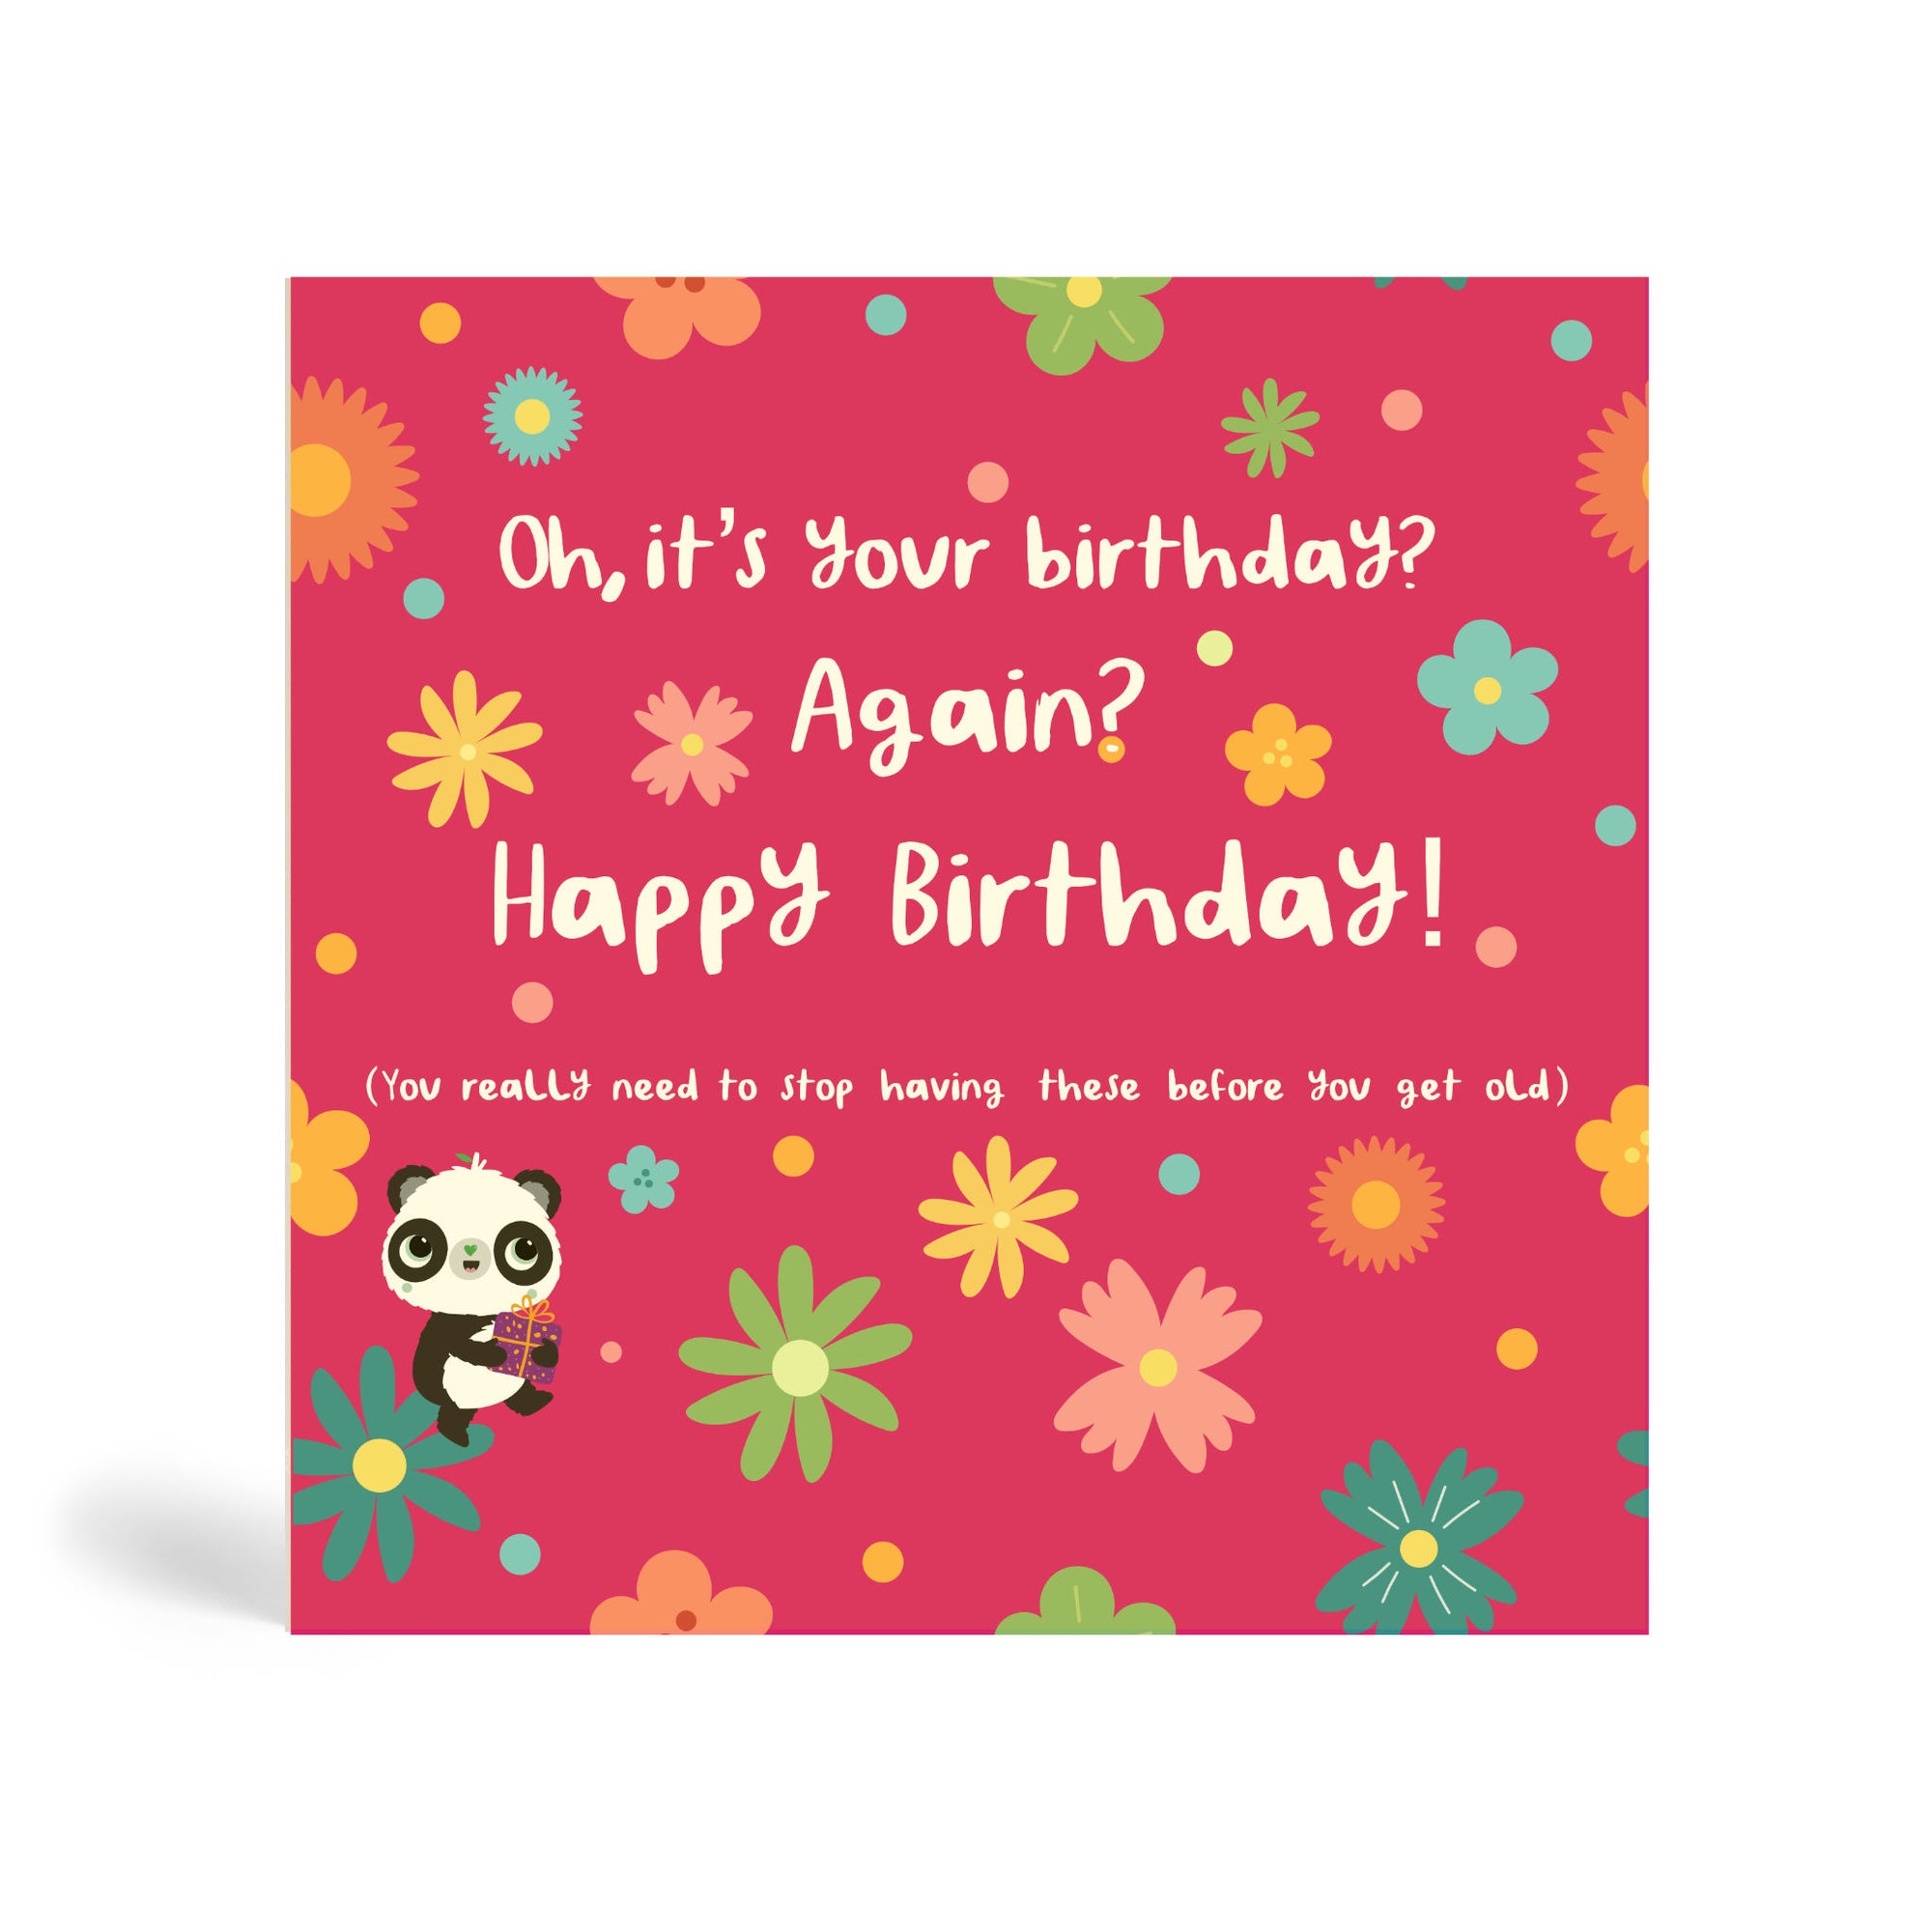 Pink 150mm square eco-friendly, tree free, birthday greeting card with several colourful flowers and Panda sitting on a green flower holding a present. The card says, Oh, it’s your birthday? Again?  Happy Birthday! You really need to stop having these before you get old.